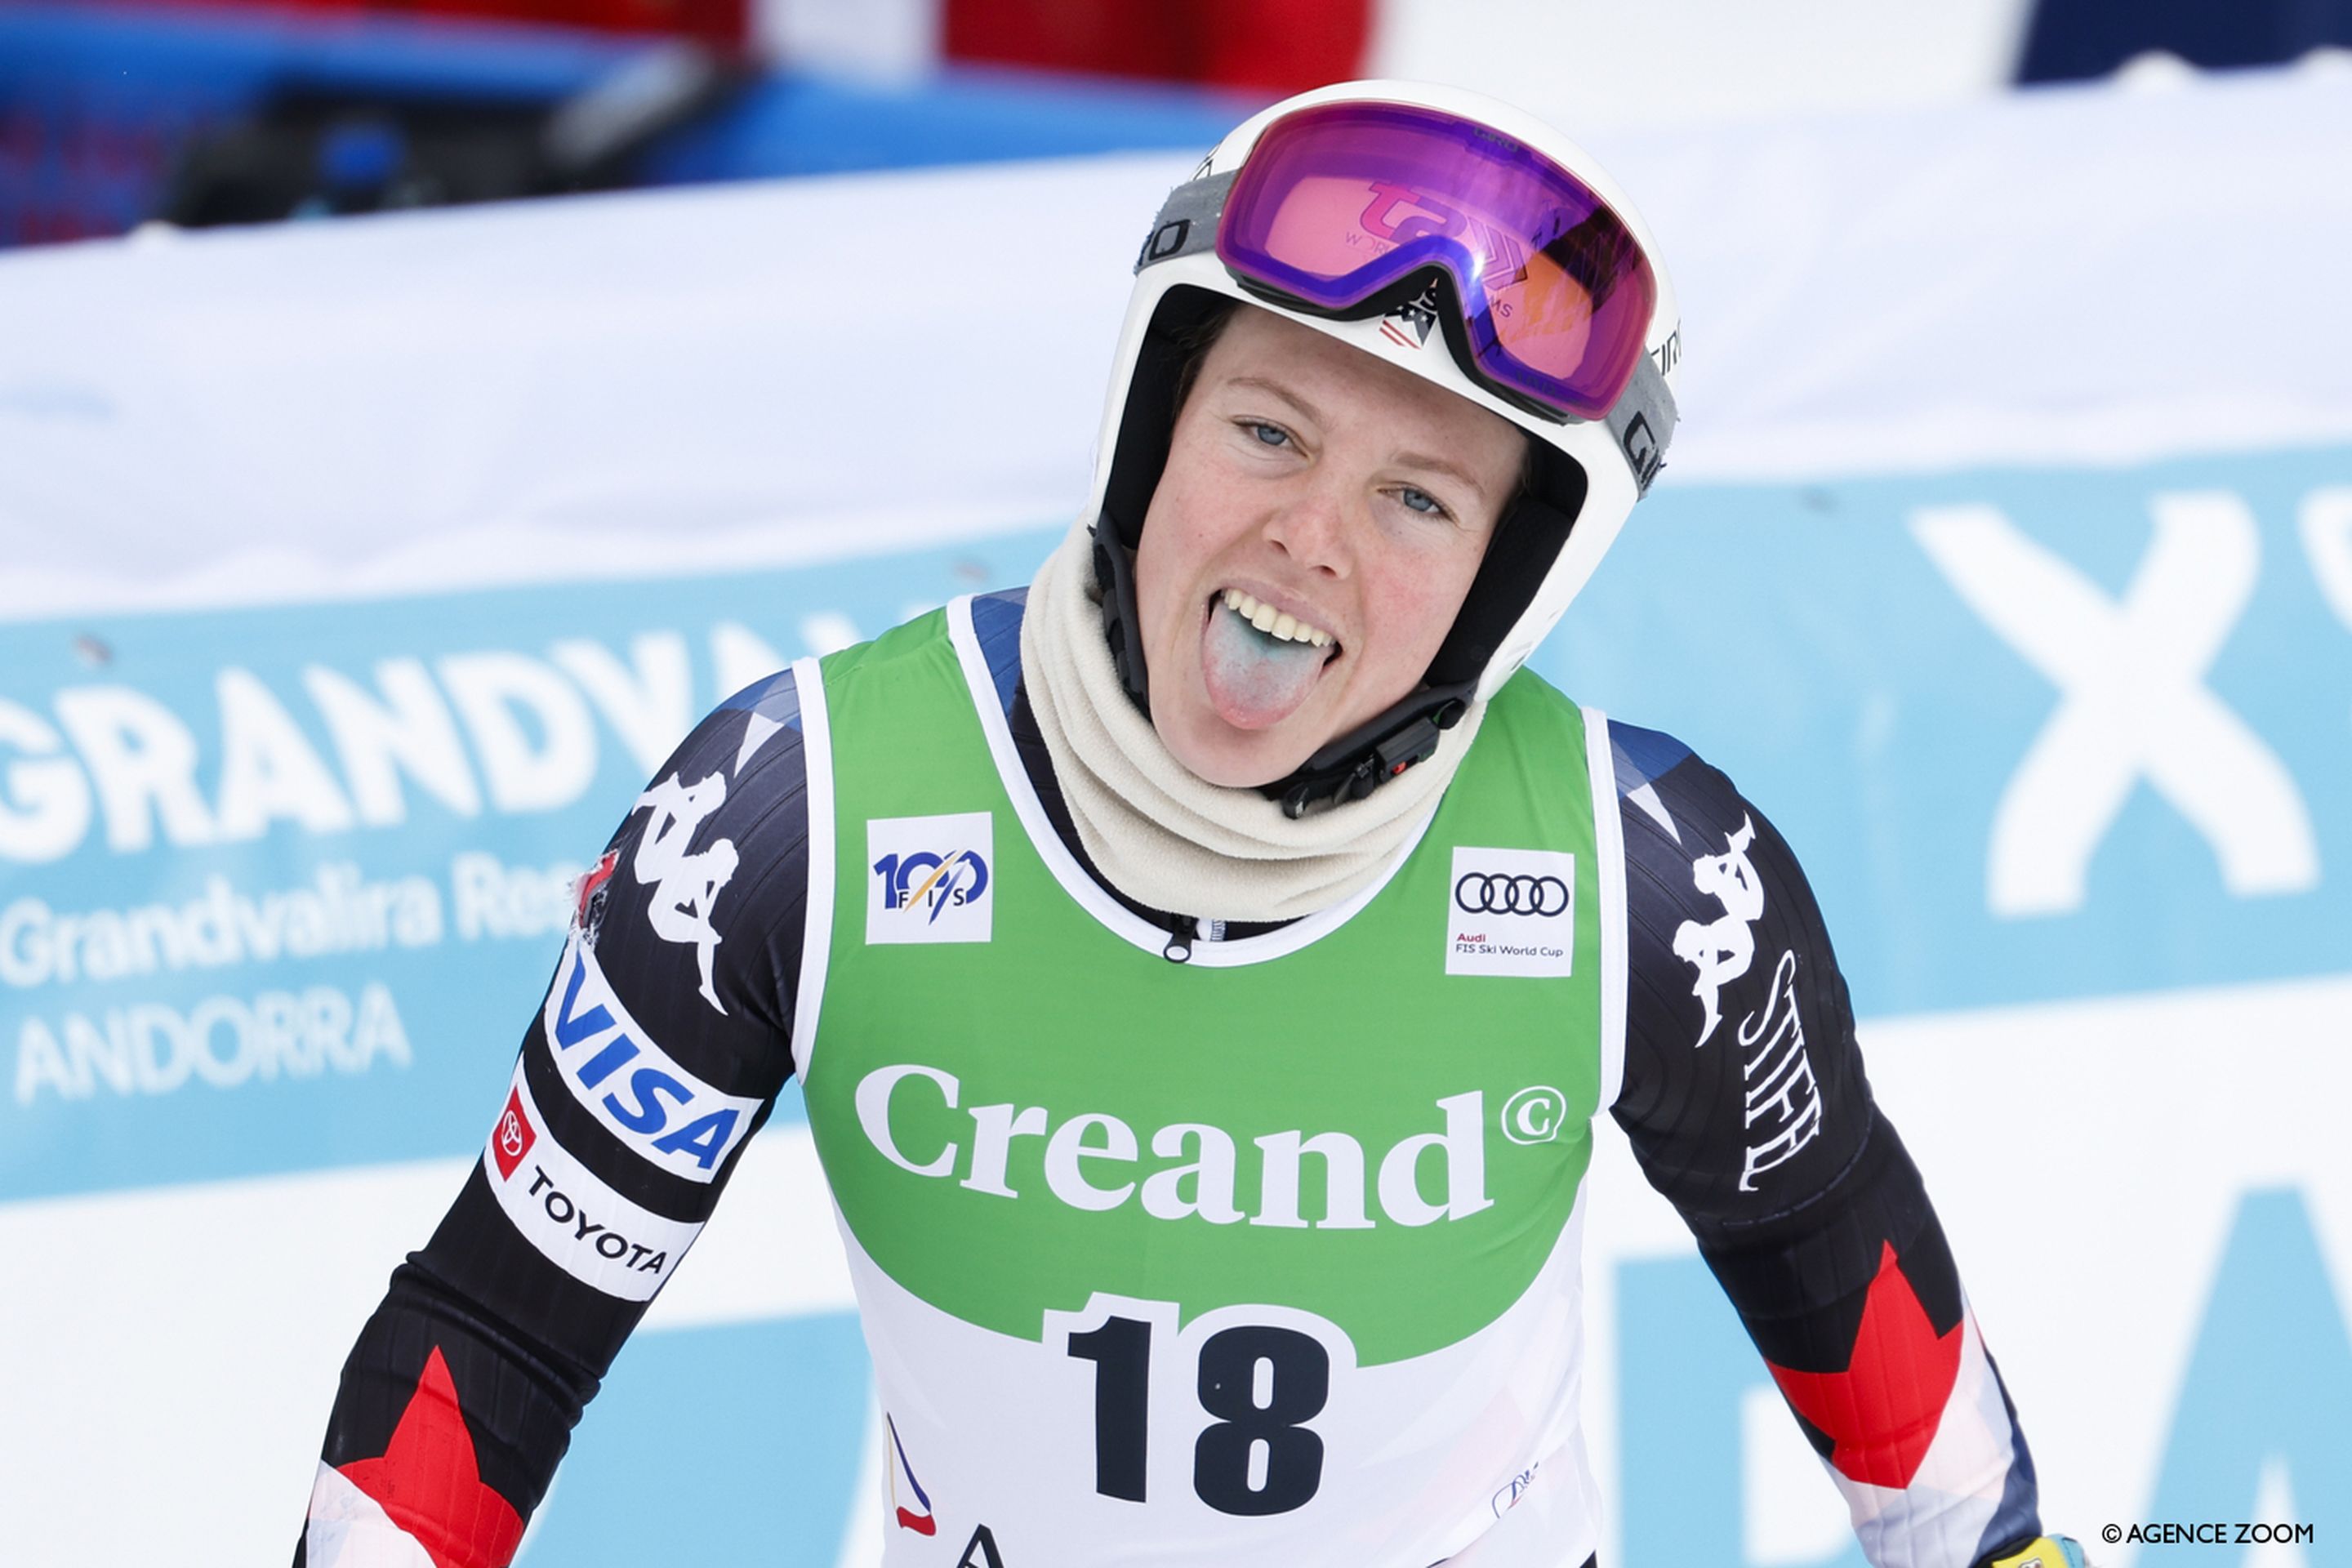 A J Hurt (USA) shows her delight after she reached her second podium of the season (Agence Zoom)